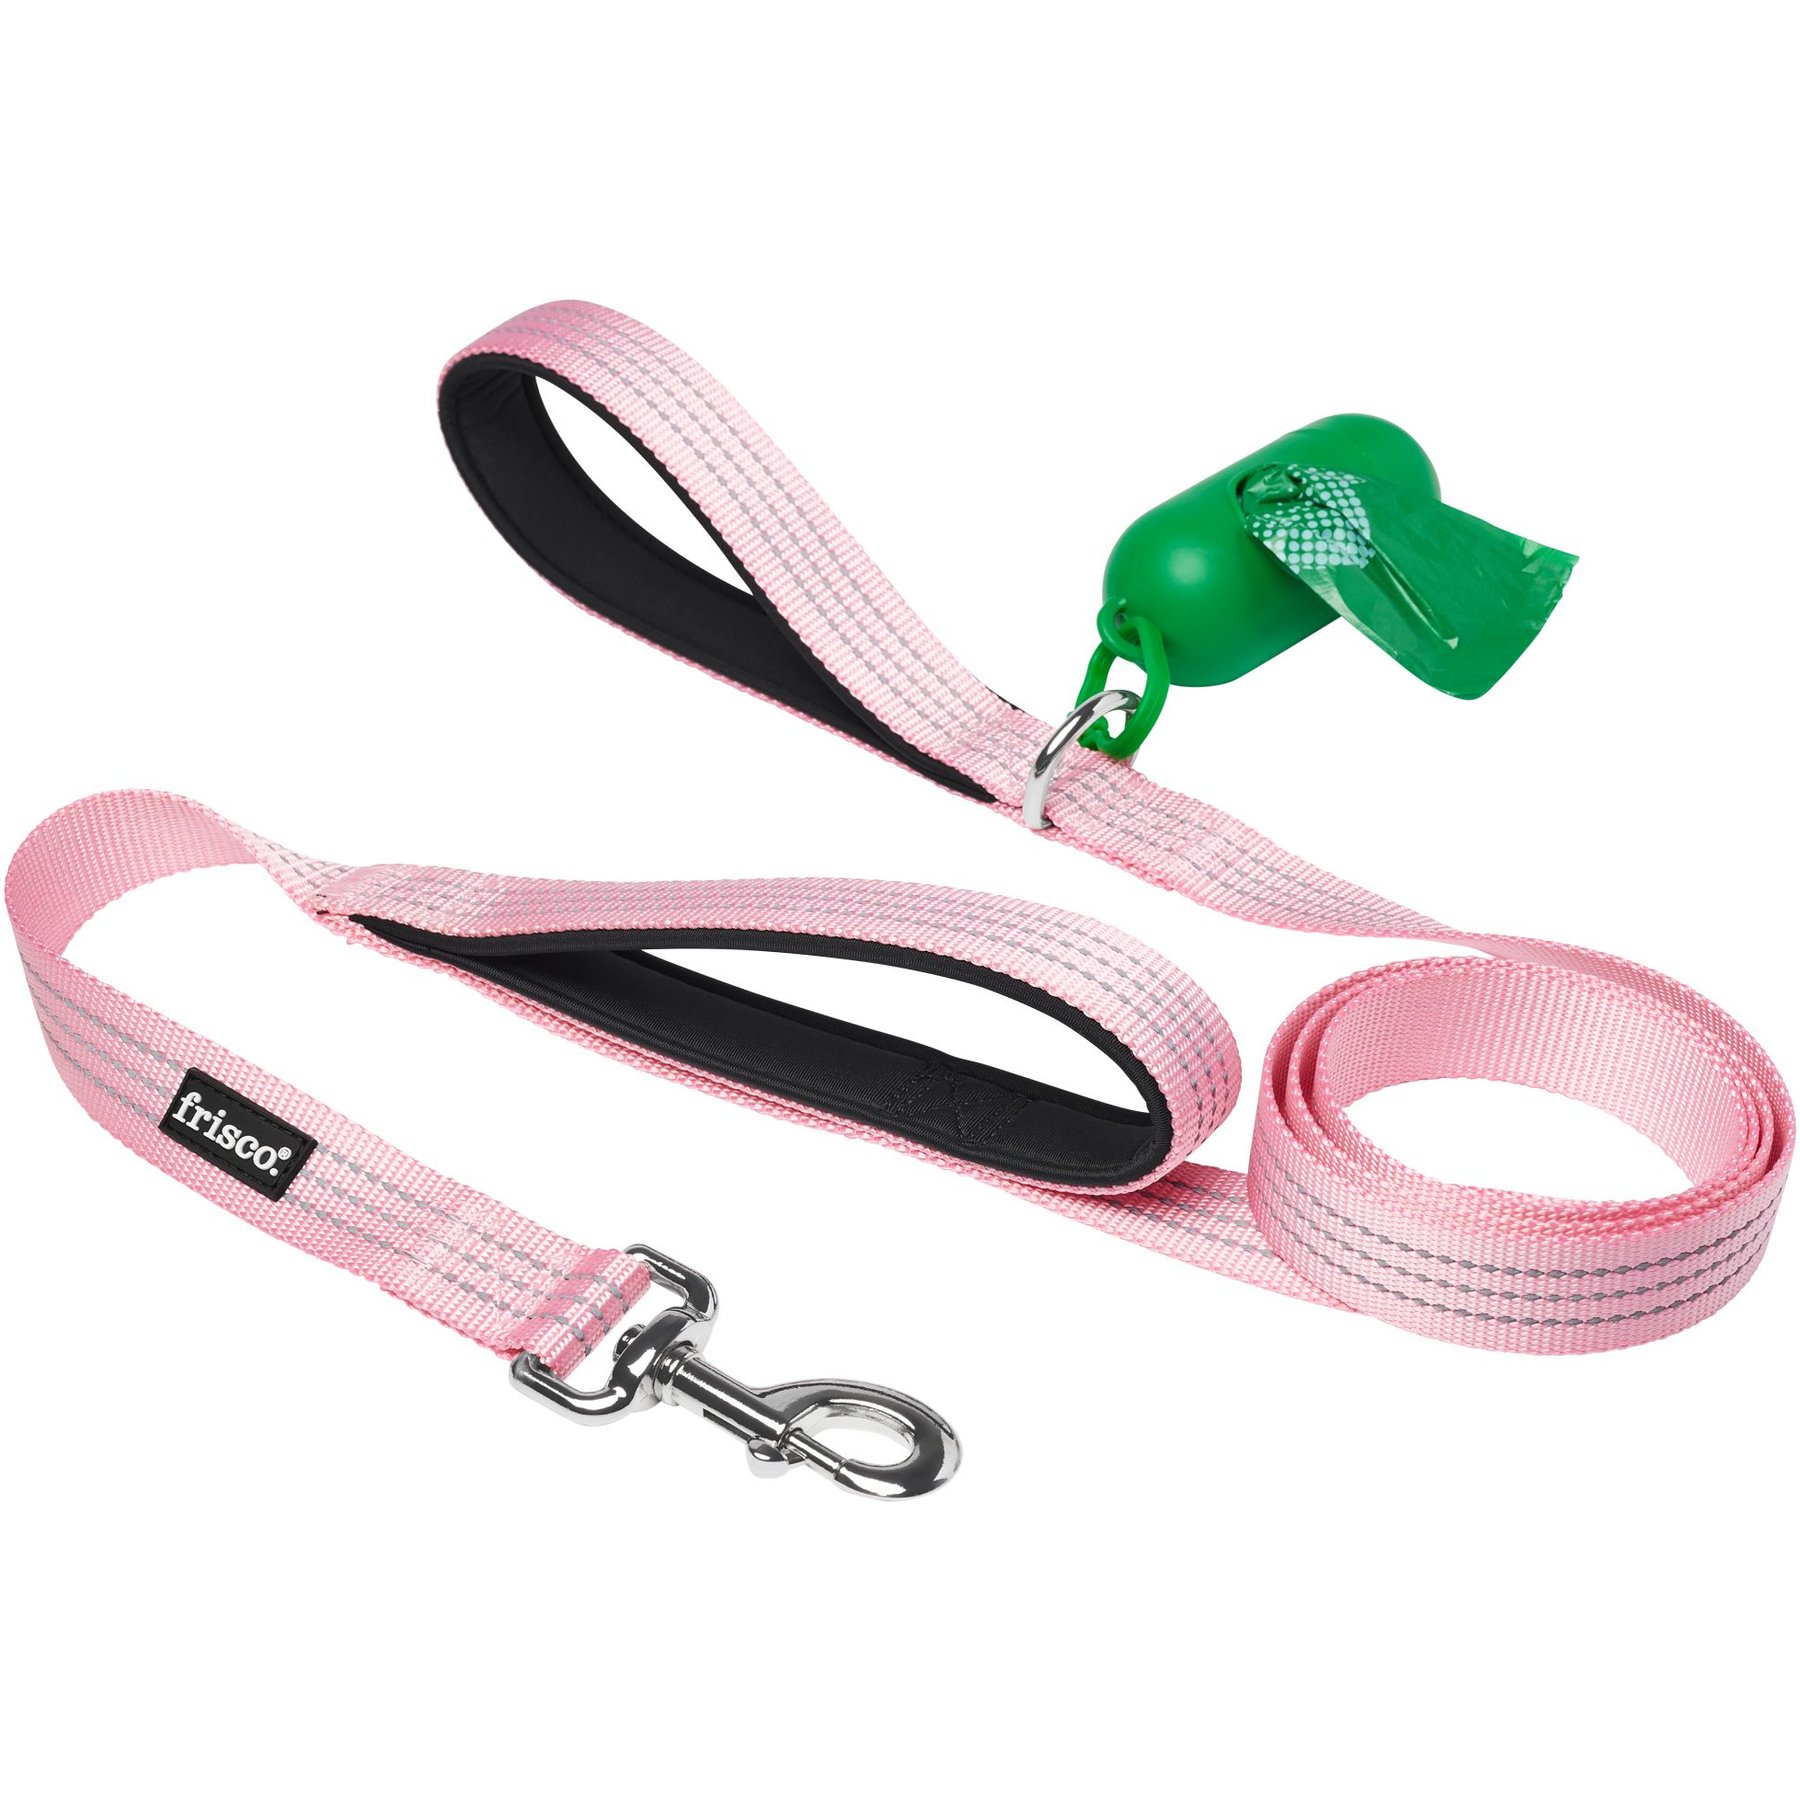 Reflective Strong Rope Dog Leash with Comfortable Padded Handle Heavy Duty Metal Clasp for Dogs for Pets (5 Ft)pink, Size: Large